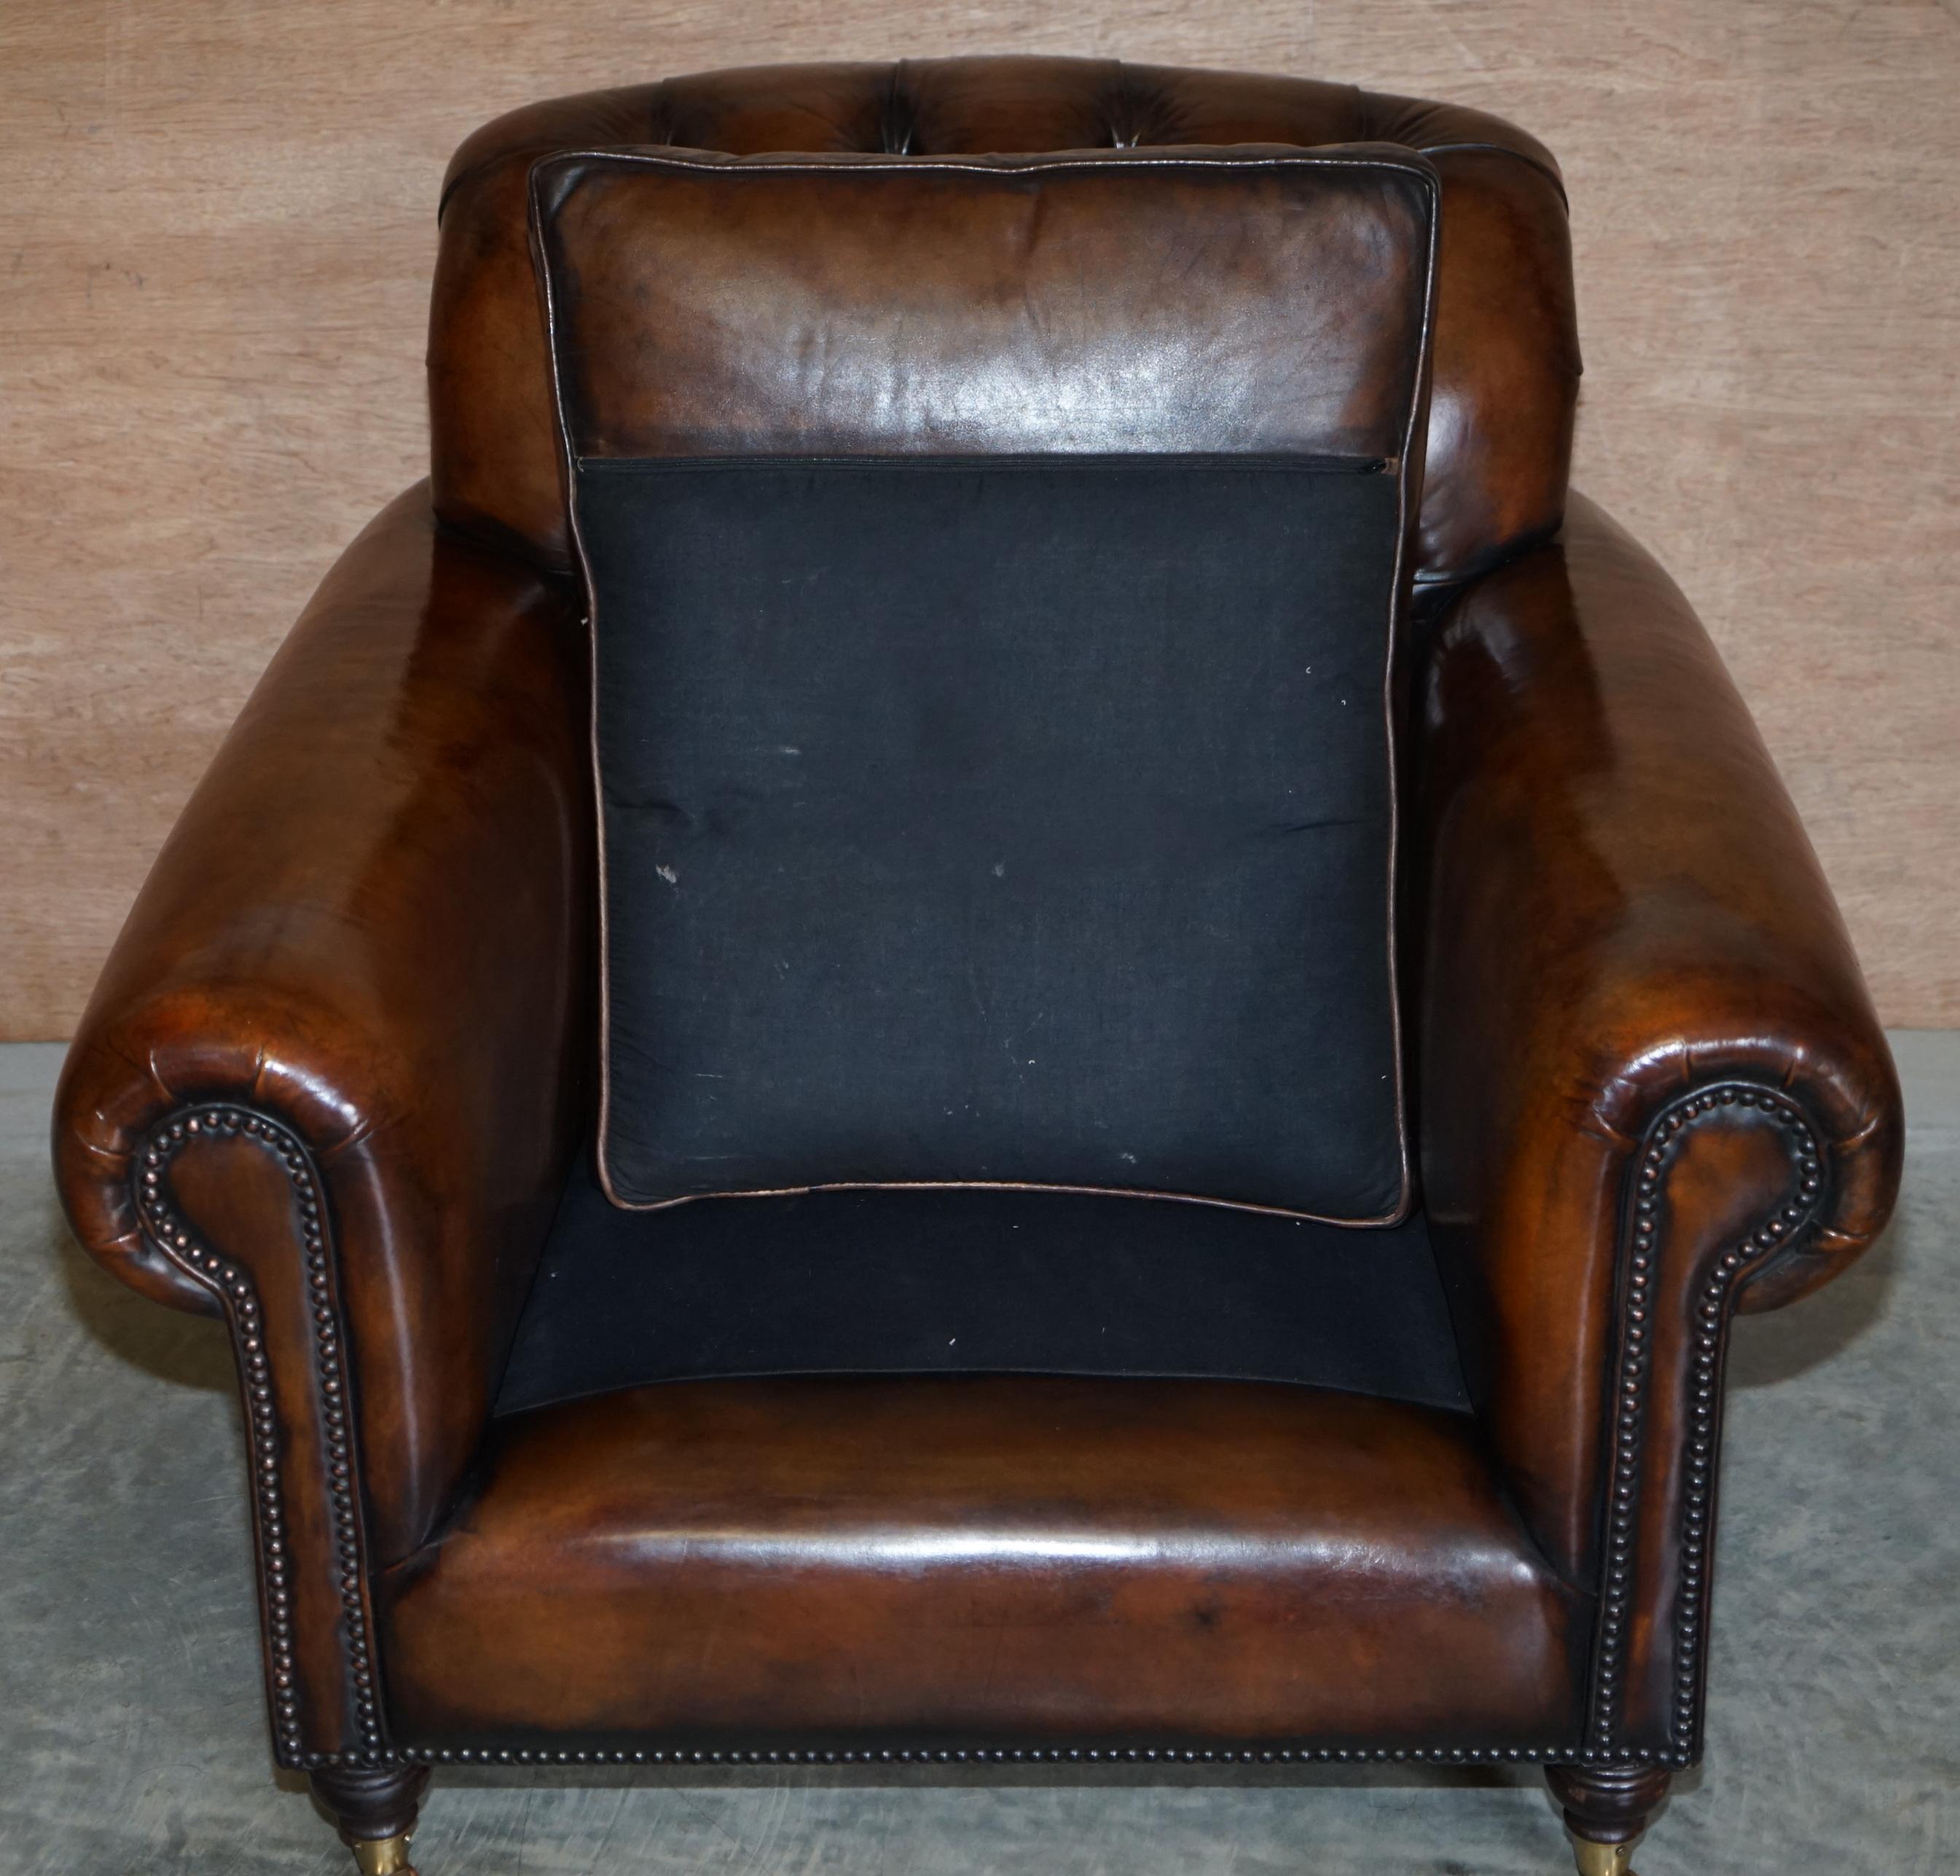 Fully Restored George Smith Cigar Brown Leather Chesterfield Tufted Armchair 13